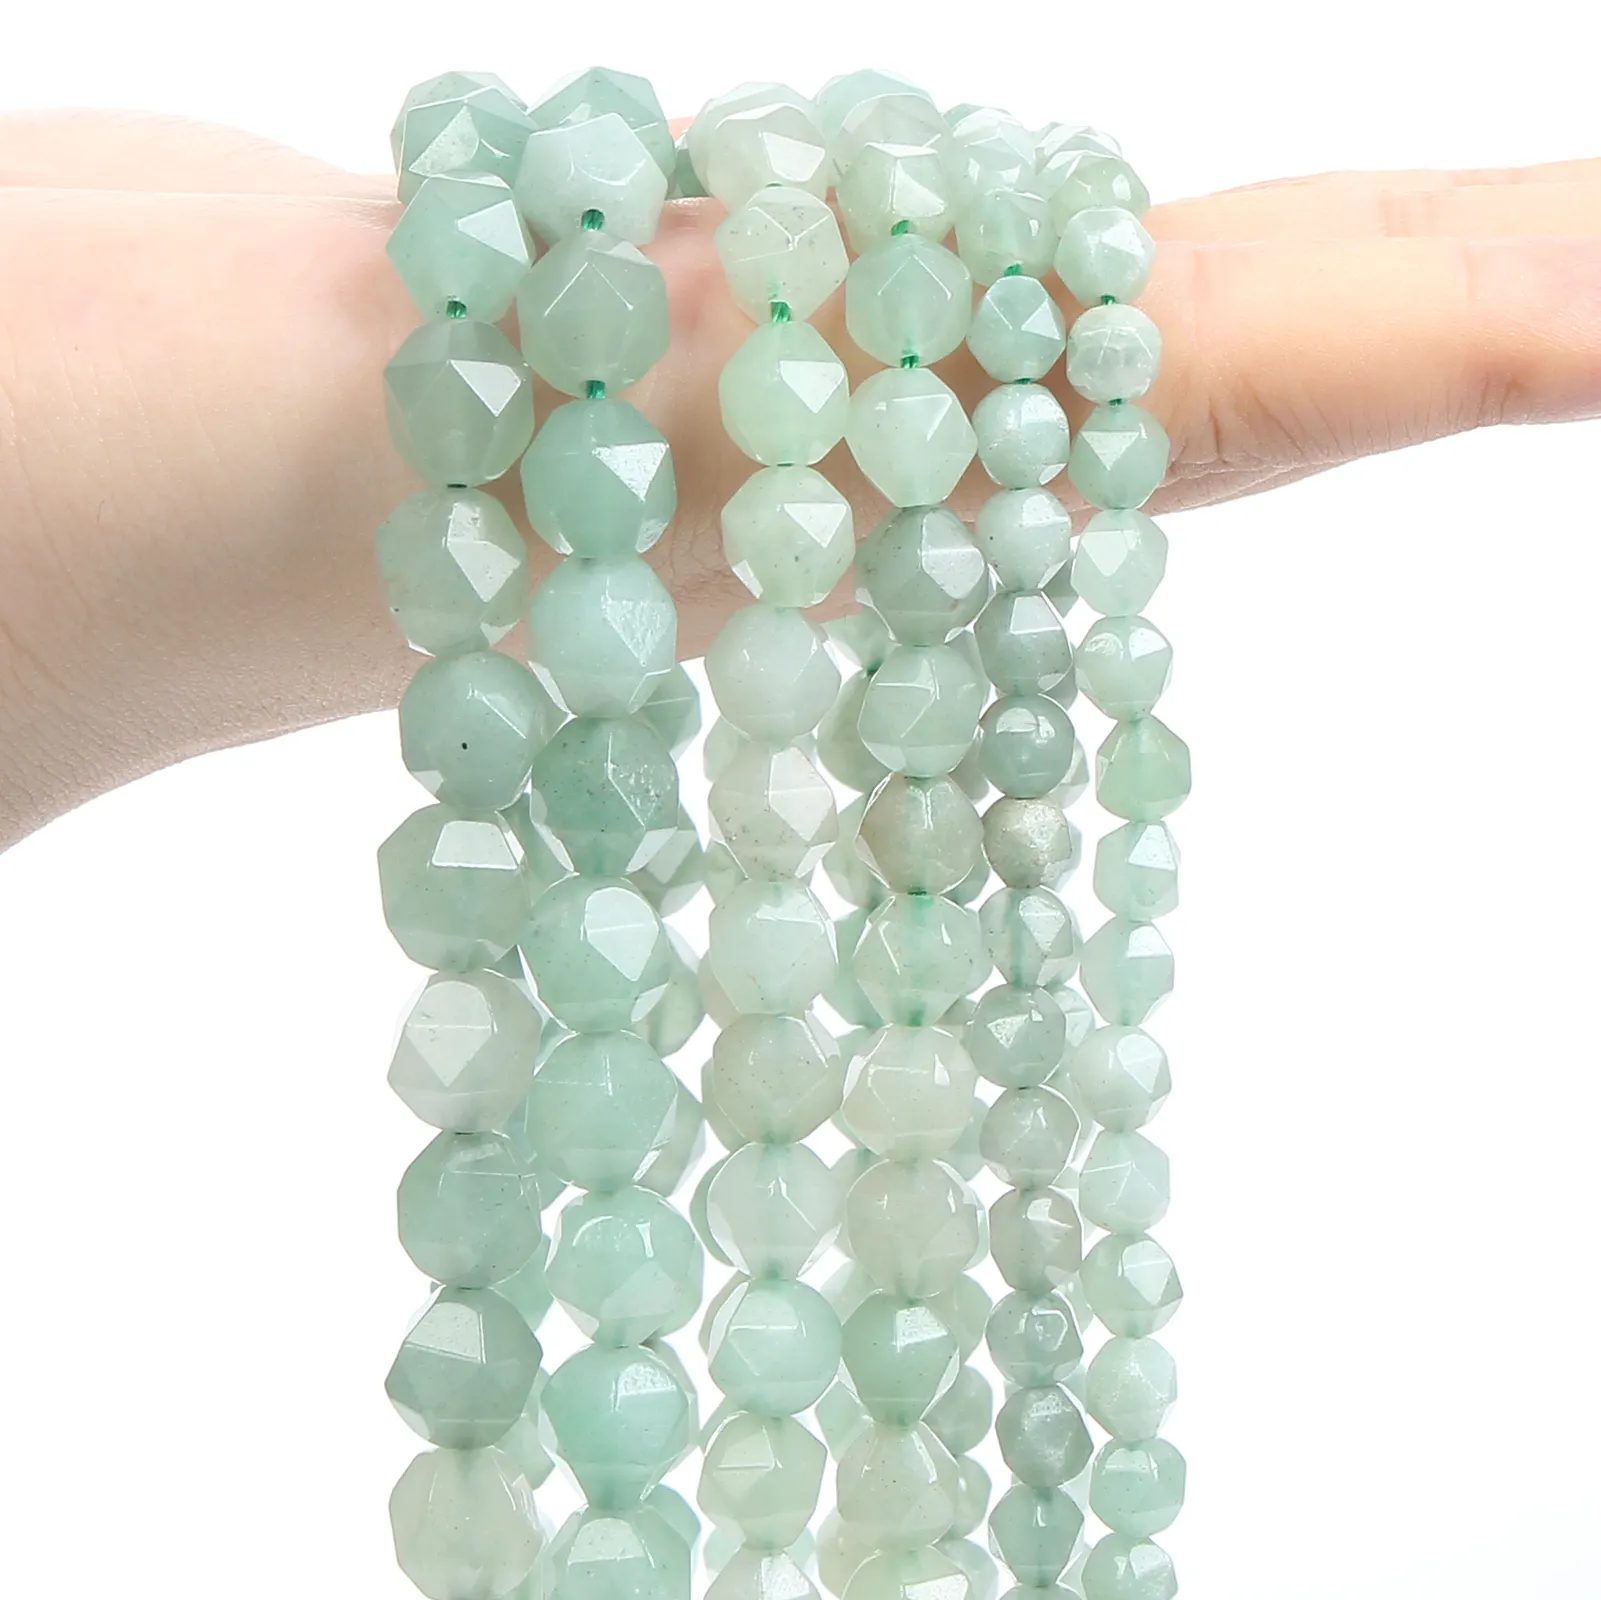 Olive Shape Faceted Green Aventurine Stone Beads Natural Stone Beads Round Loose Beads For Jewelry Making DIY Bracelets Handmade